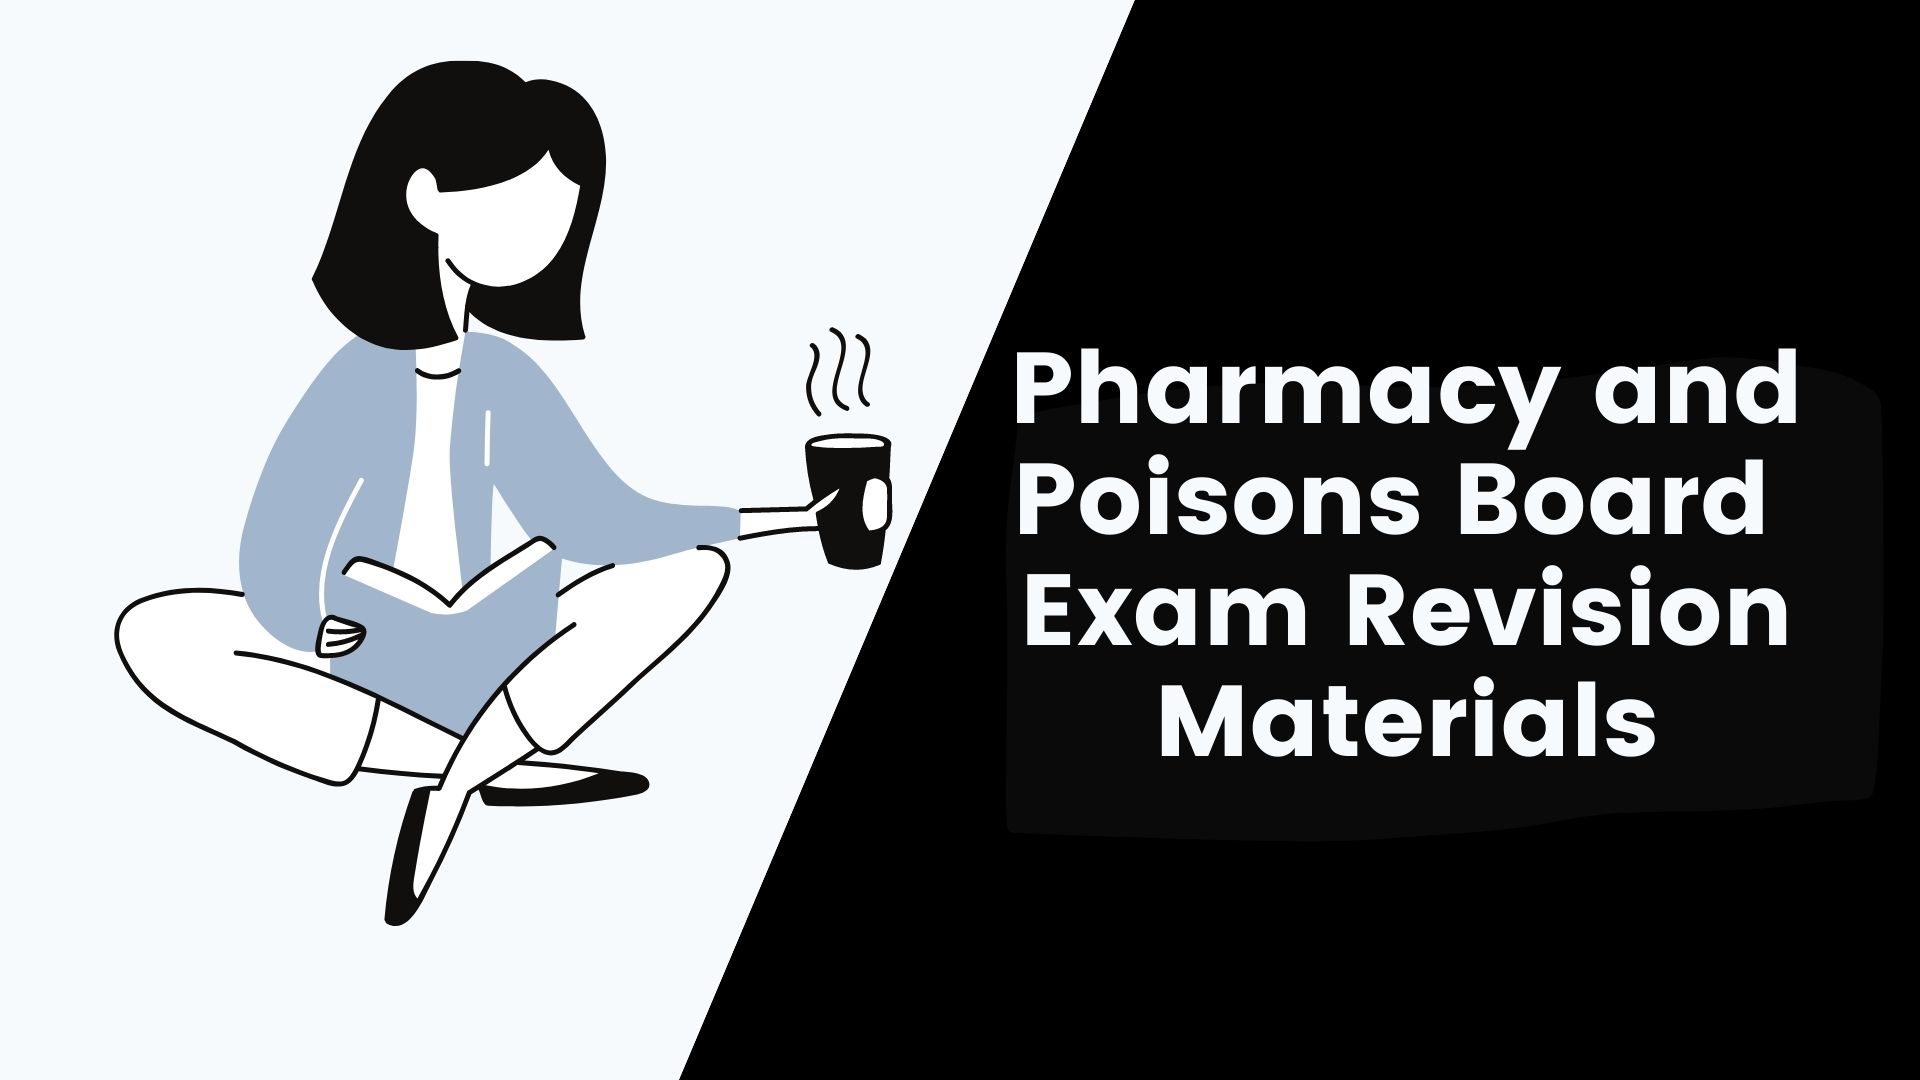 Pharmacy and Poisons Board (PPB) exam papers and Class Notes